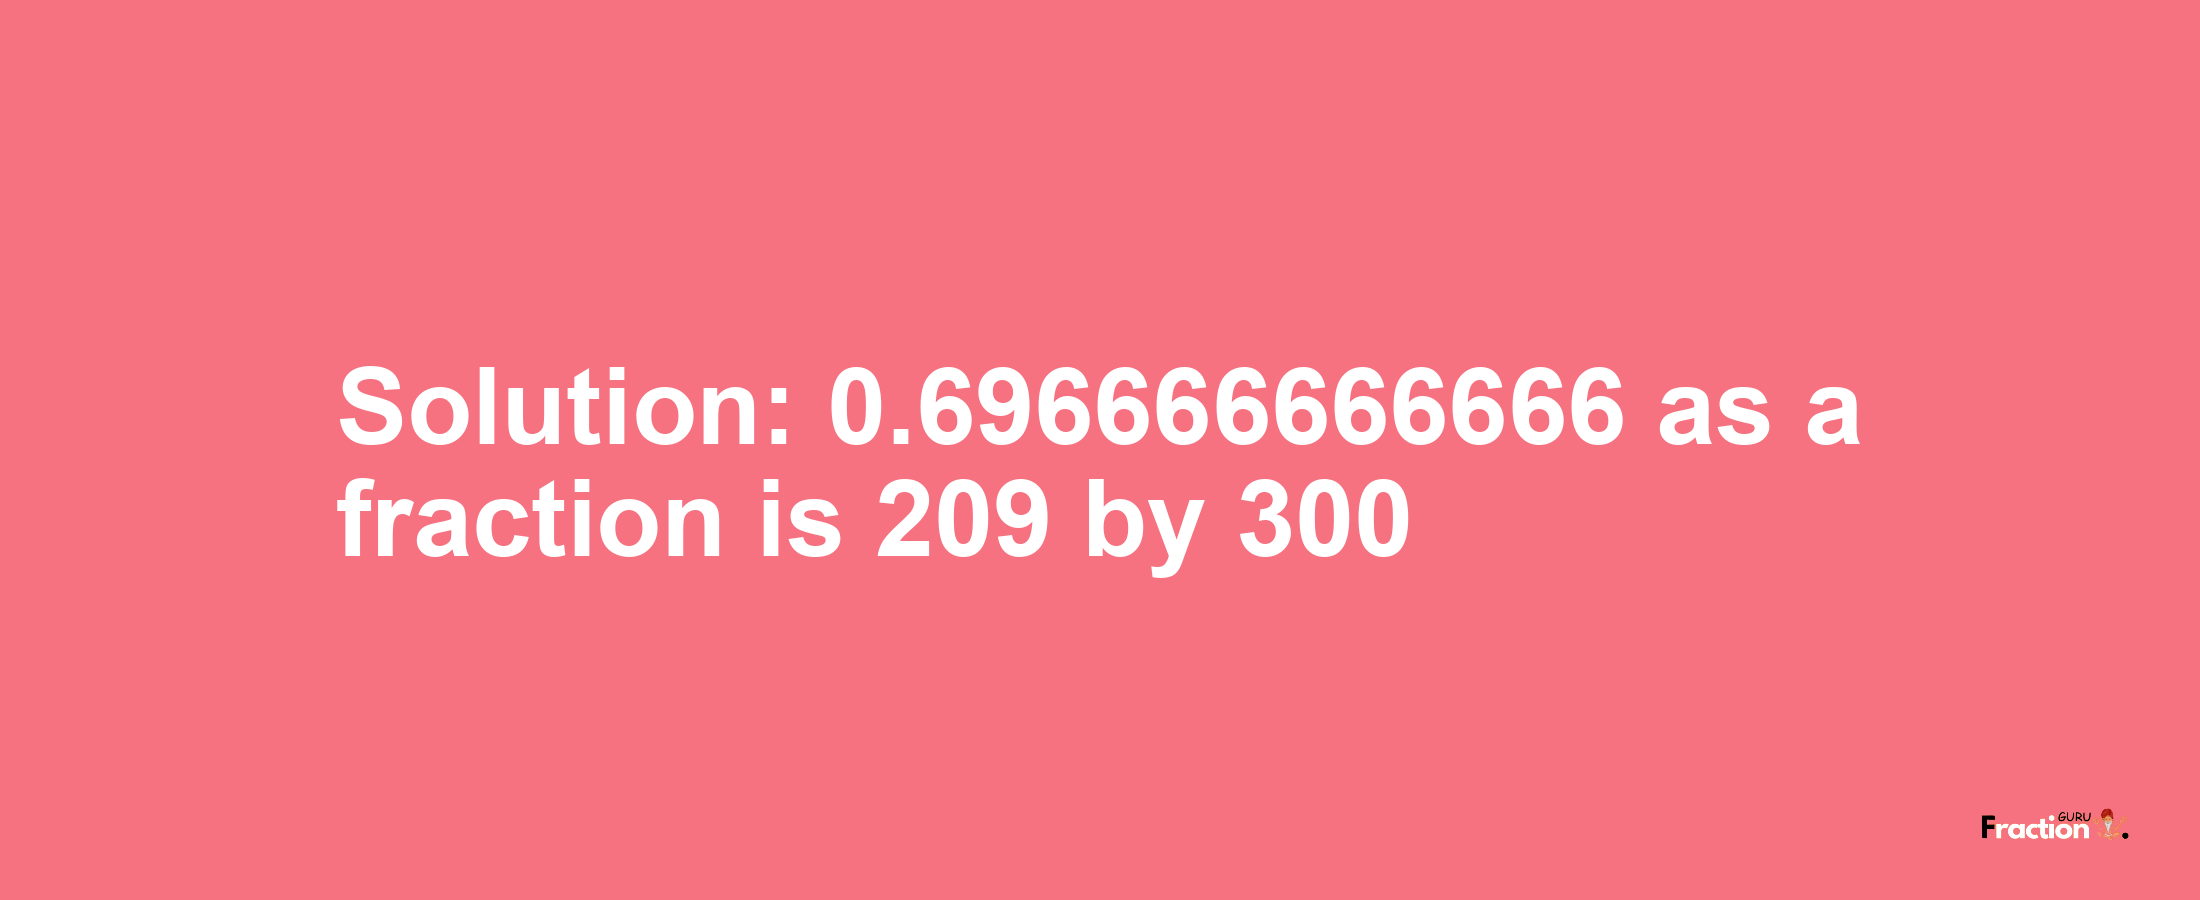 Solution:0.696666666666 as a fraction is 209/300